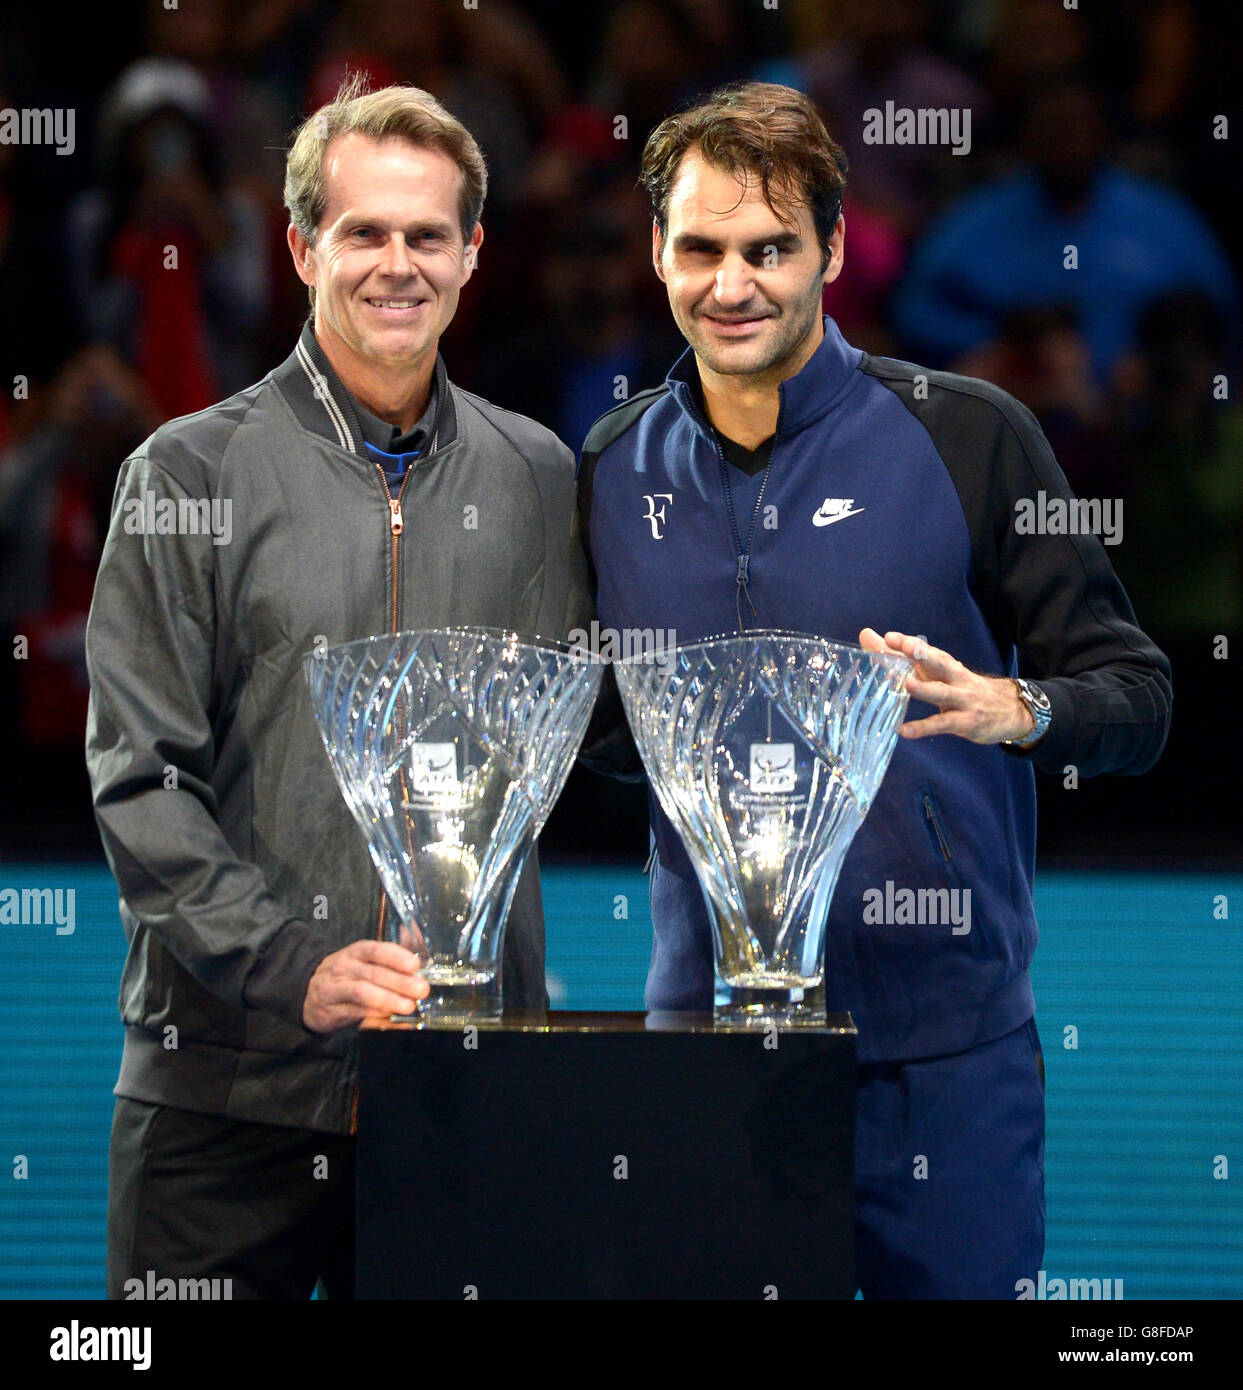 Switzerland's Roger Federer (right) and trainer Stefan Edberg with the trophies for 'Fans Favourite' and 'Stefan Edberg Sportsman of the Year' during day one of the ATP World Tour Finals at the O2 Arena, London. PRESS ASSSOCIATION Photo. Picture date: Sunday November 15, 2015. See PA story TENNIS London. Photo credit should read: Adam Davy/PA Wire Stock Photo